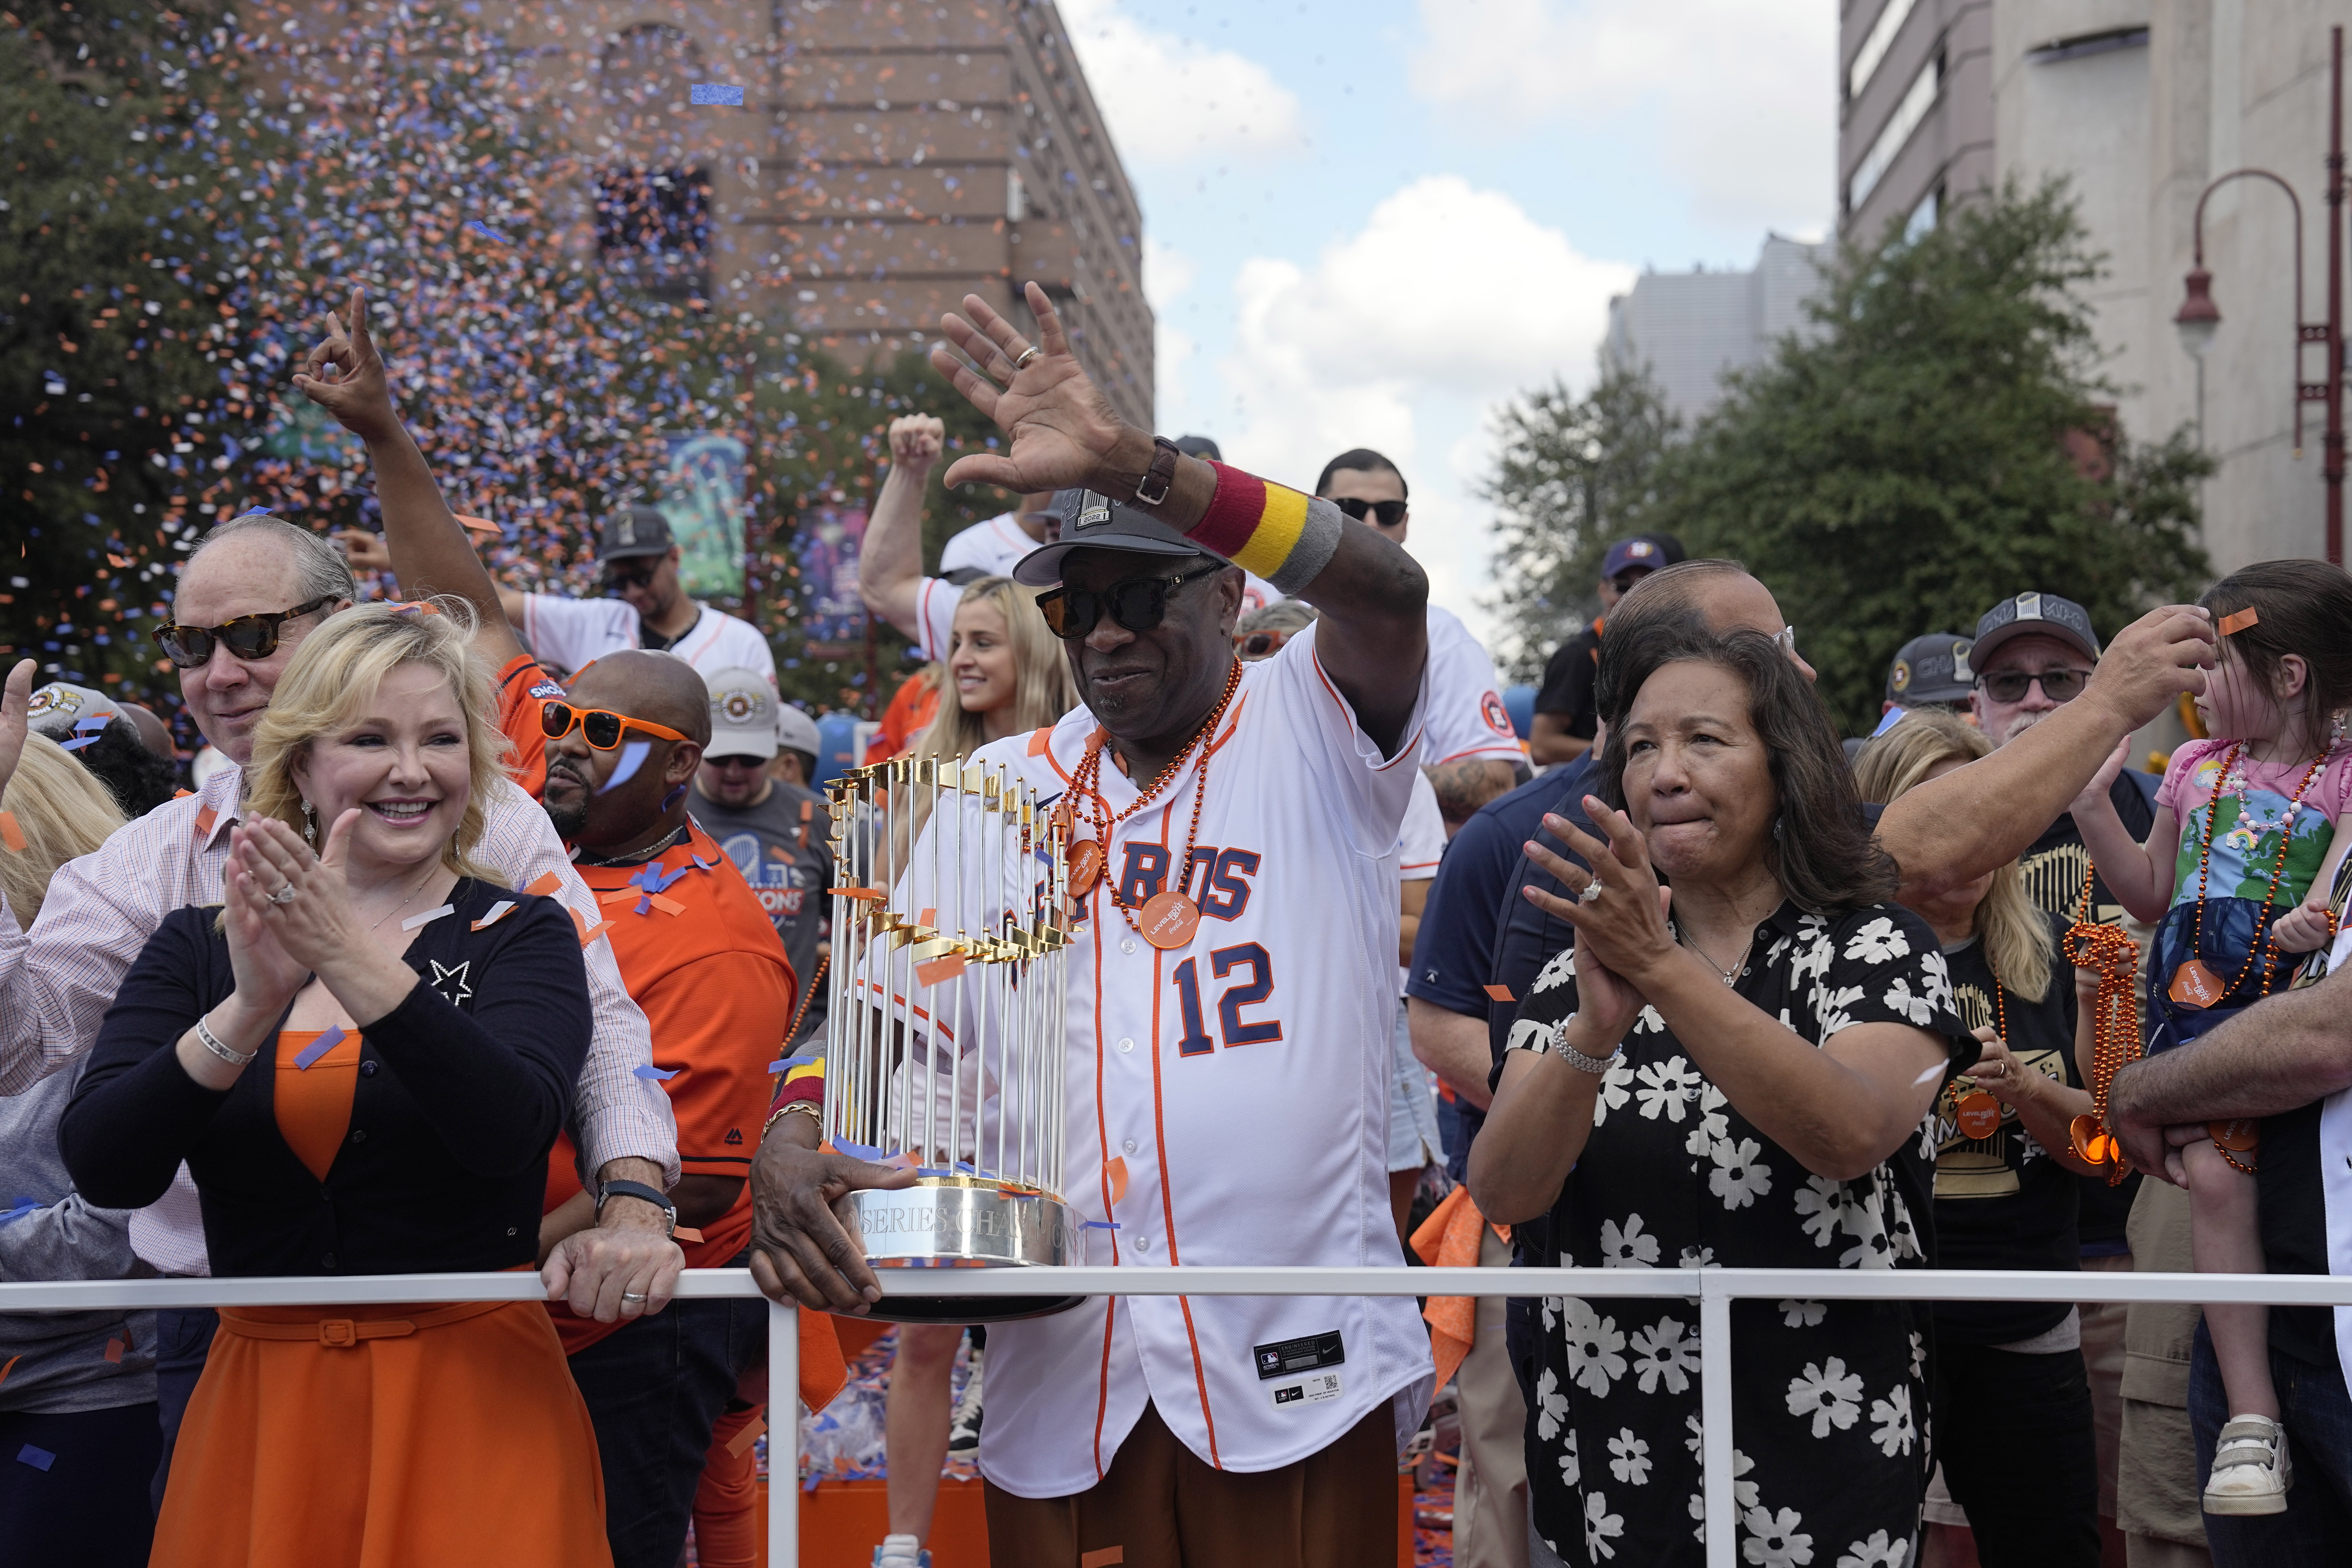 2022 World Series: After 25 years, Astros manager Dusty Baker gets his ring